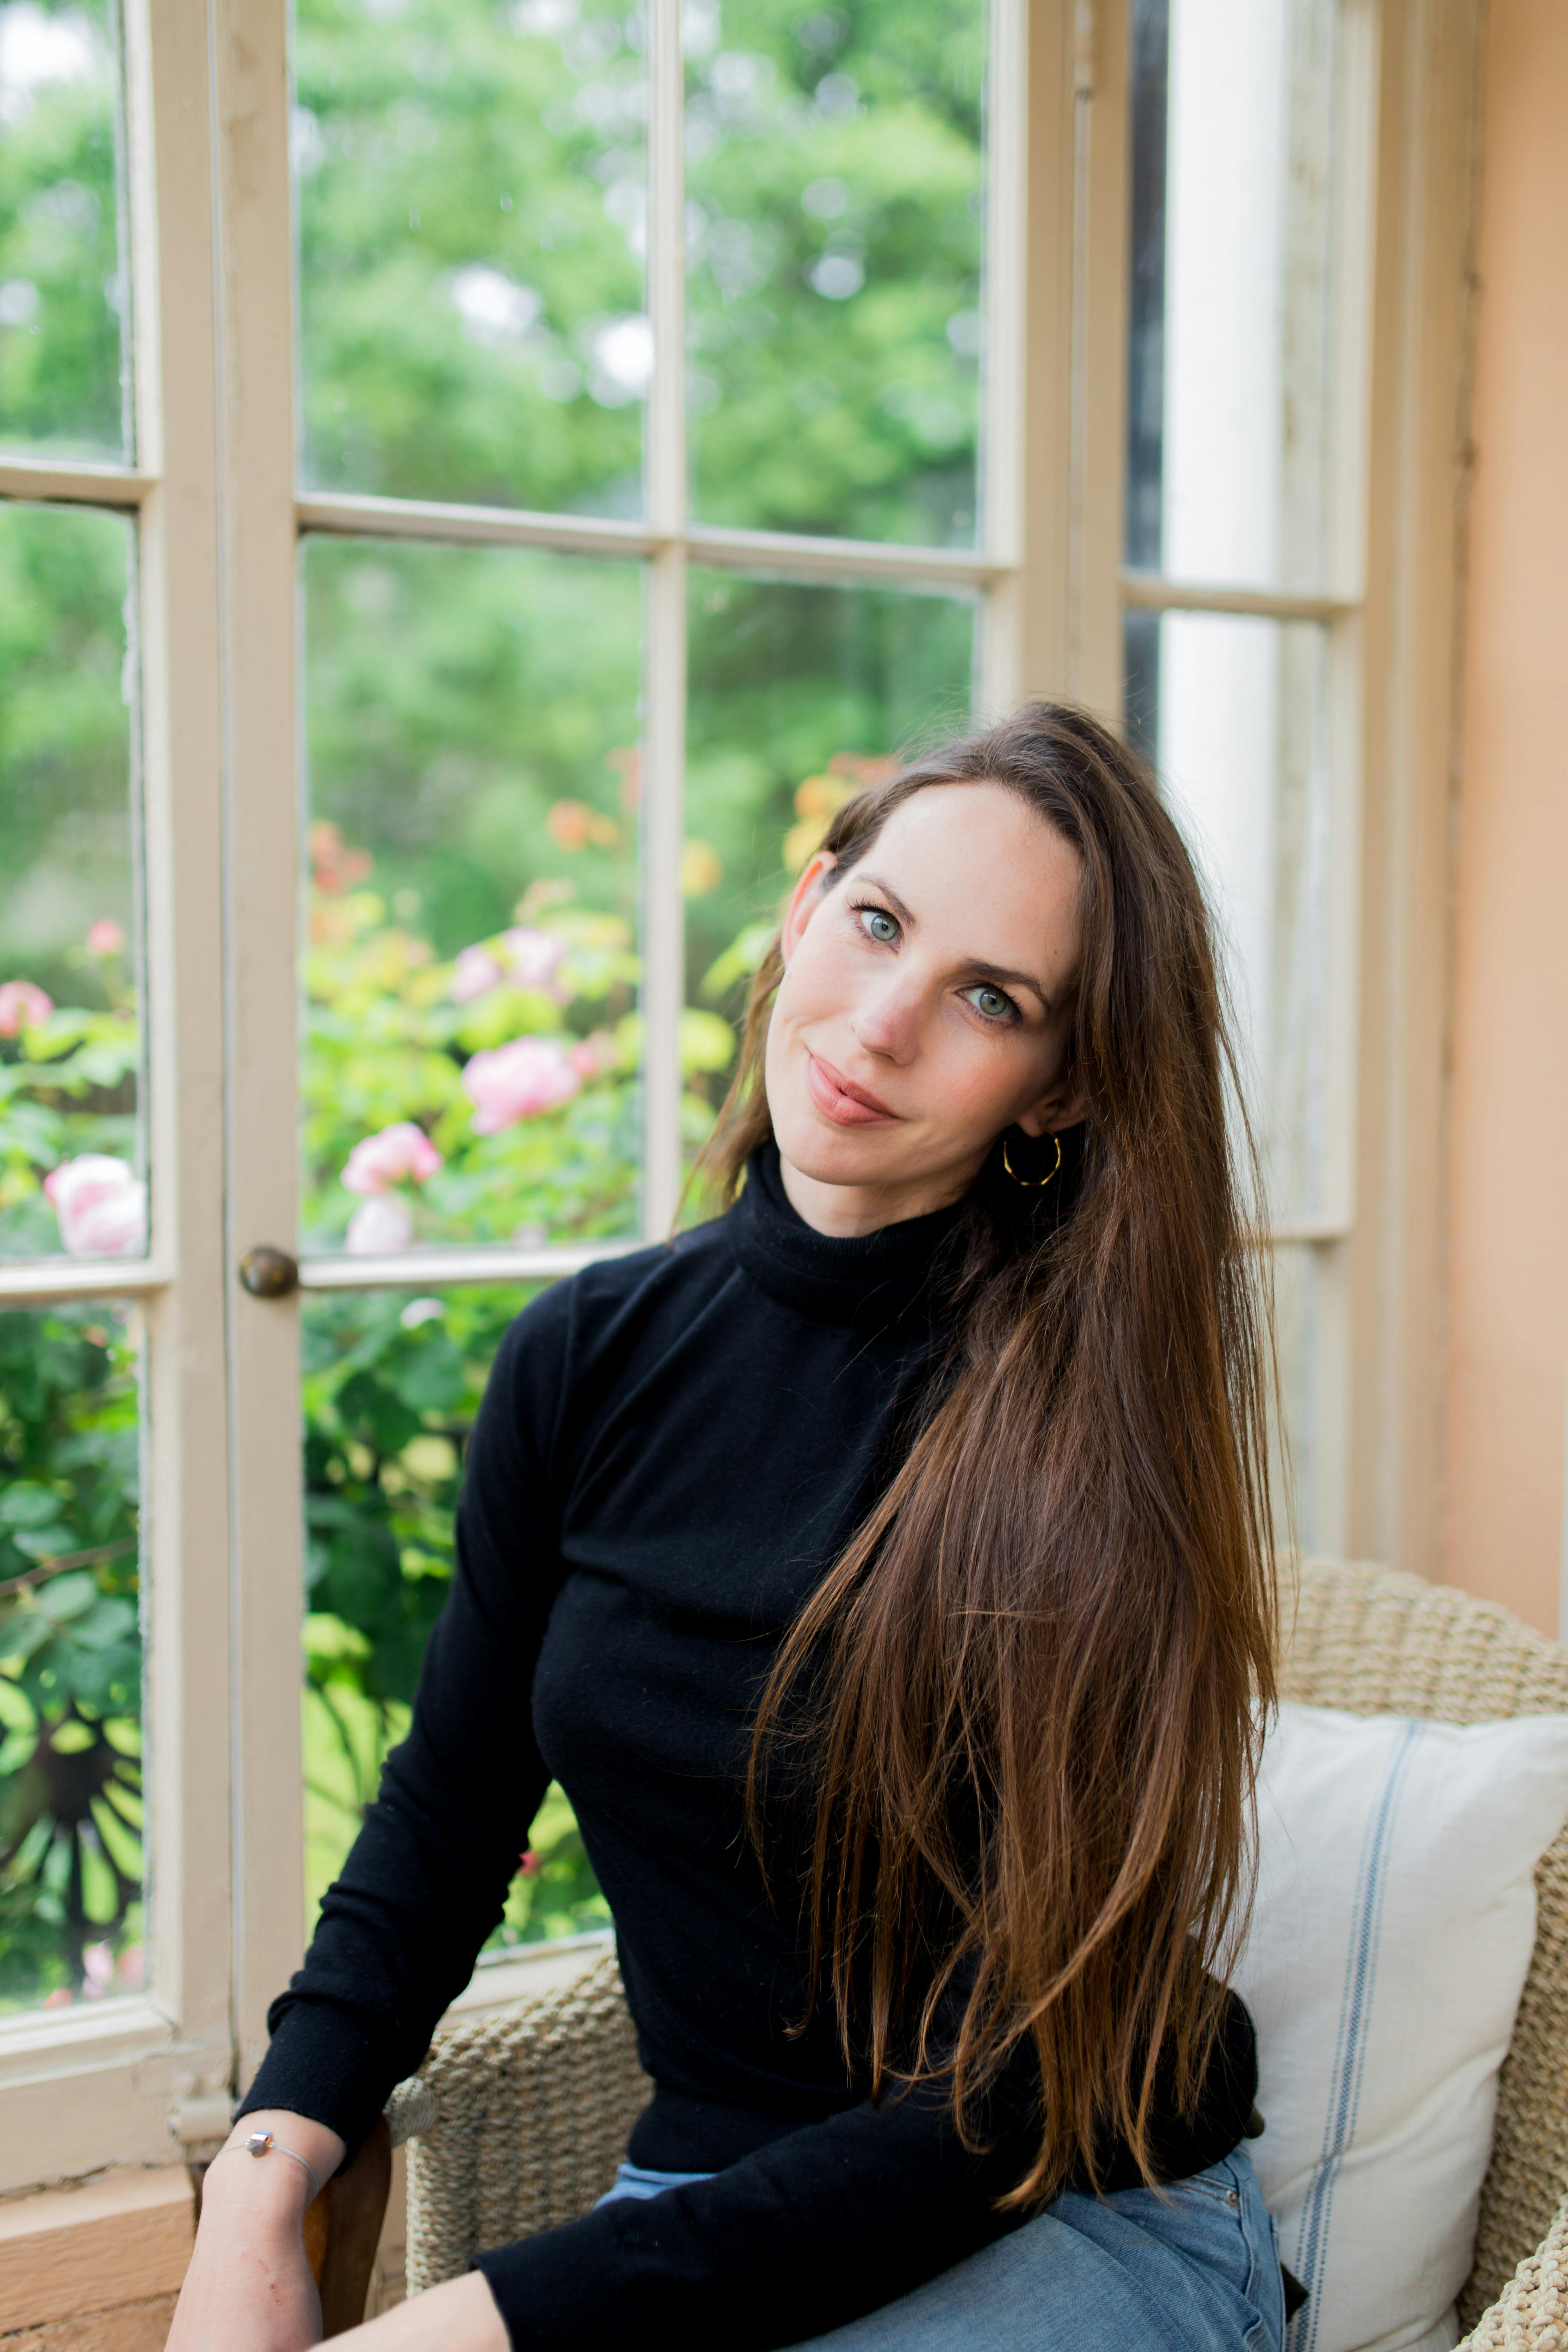 A photograph of Hayley Quinn sitting in a chair facing towards the camera and smiling with her head tilted slightly on one side. In the background is a window looking out into a green garden with a rosebush close to the window.